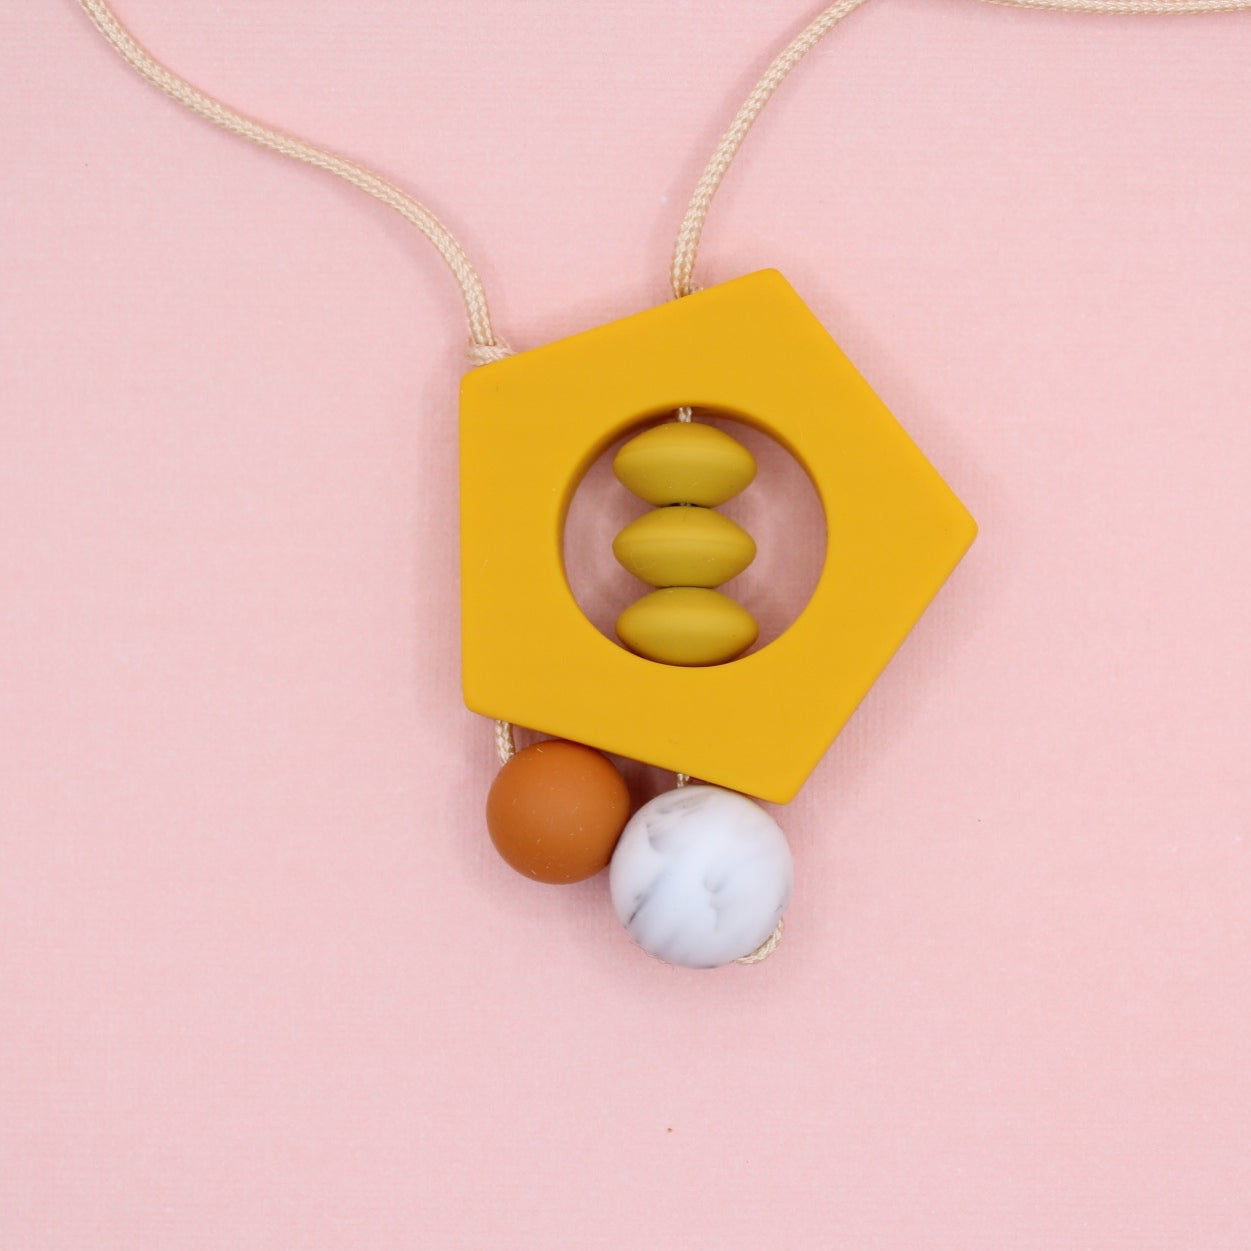 'Penny' Amber Yellow Pentagon Silicone Pendant Necklace - Mustard, Burnt Orange and Marble